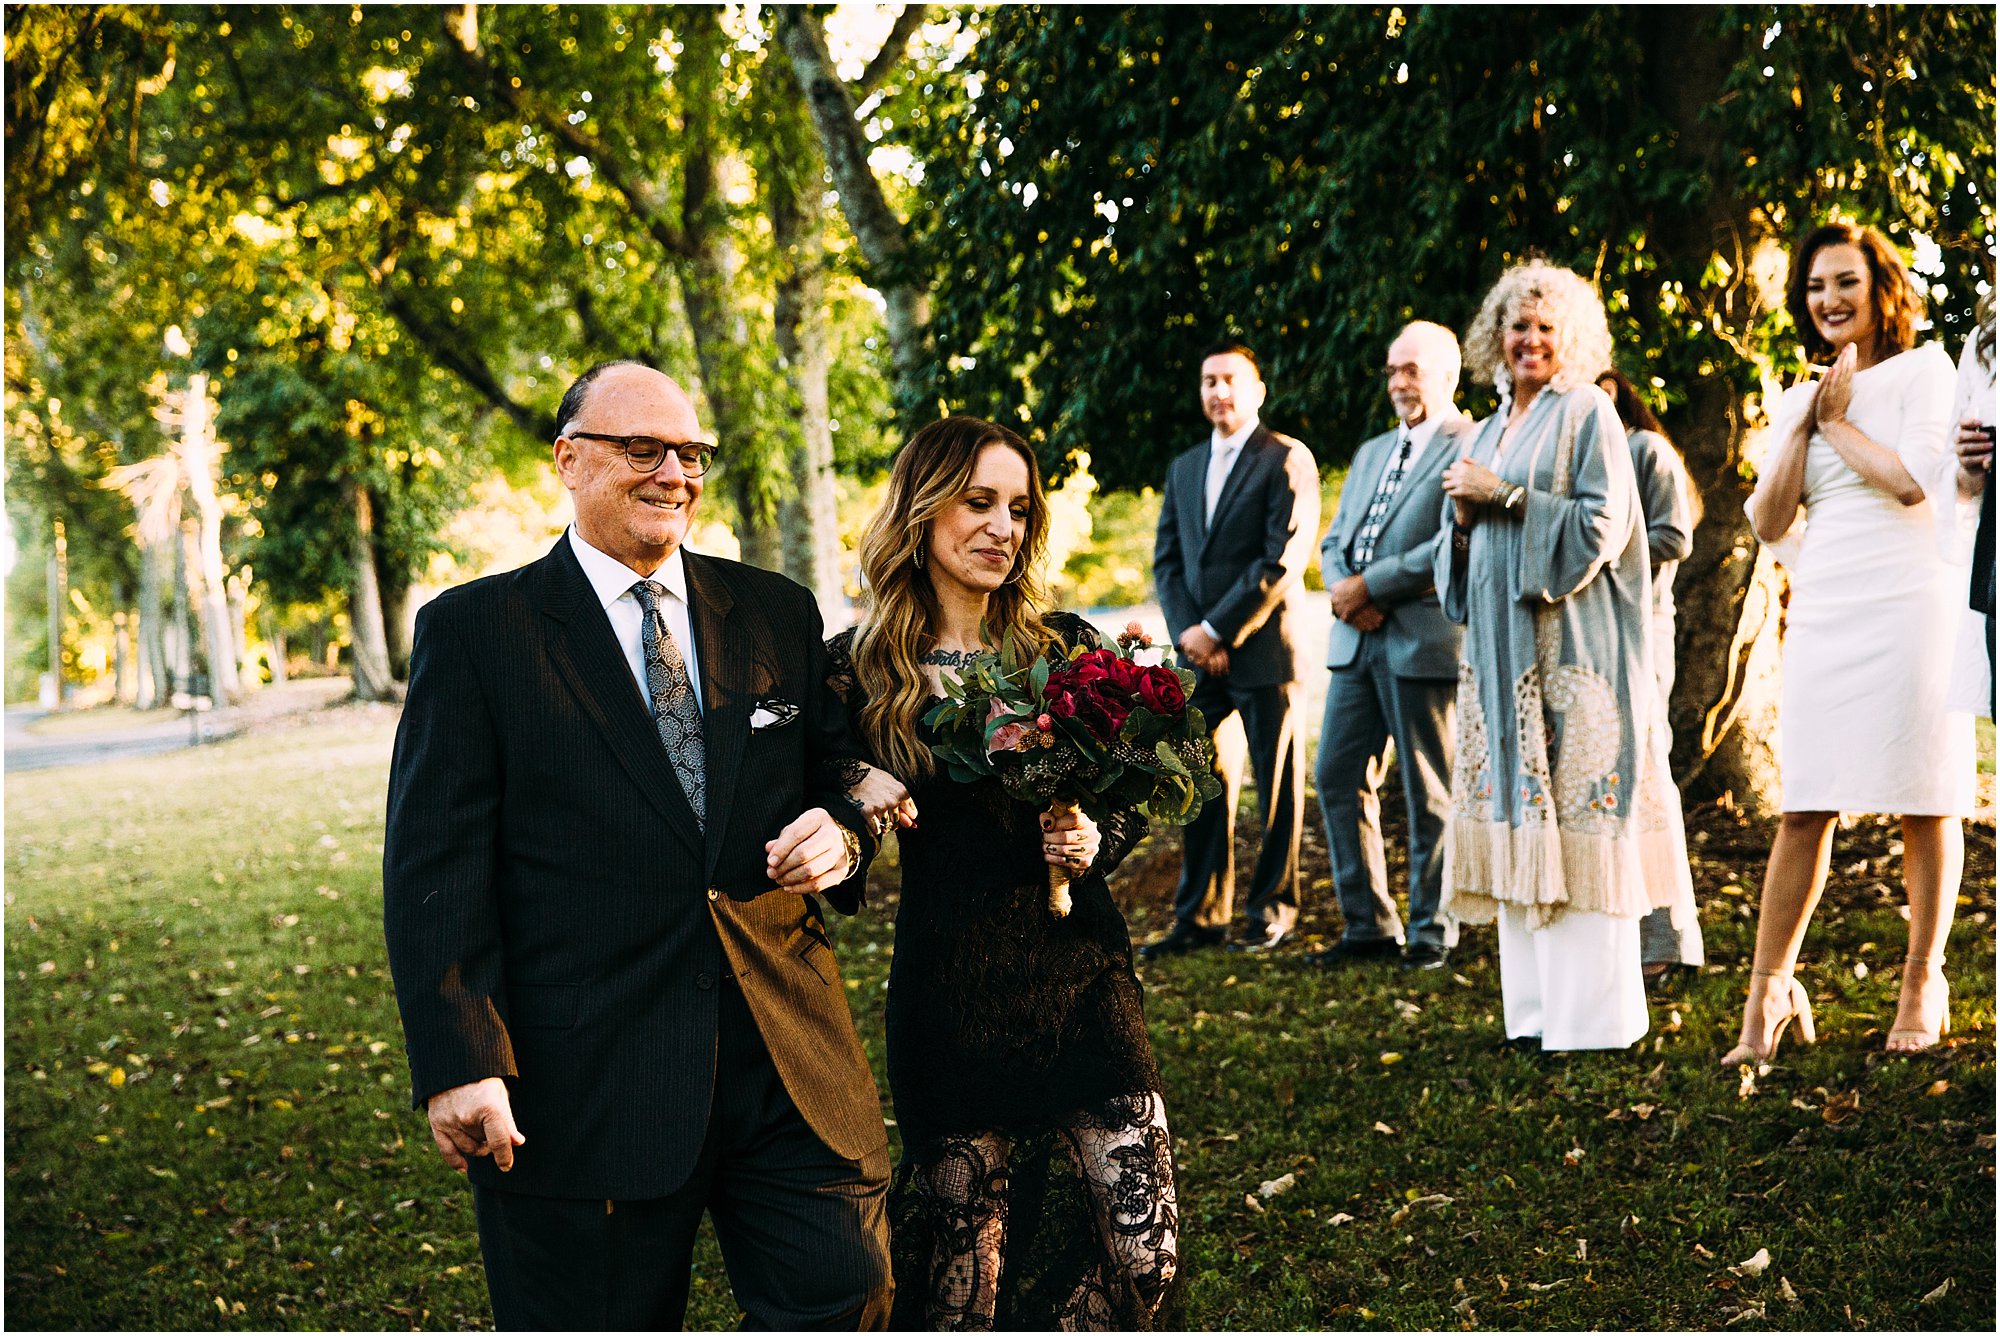 Father walking his daughter down the aisle during fall, backyard ceremony